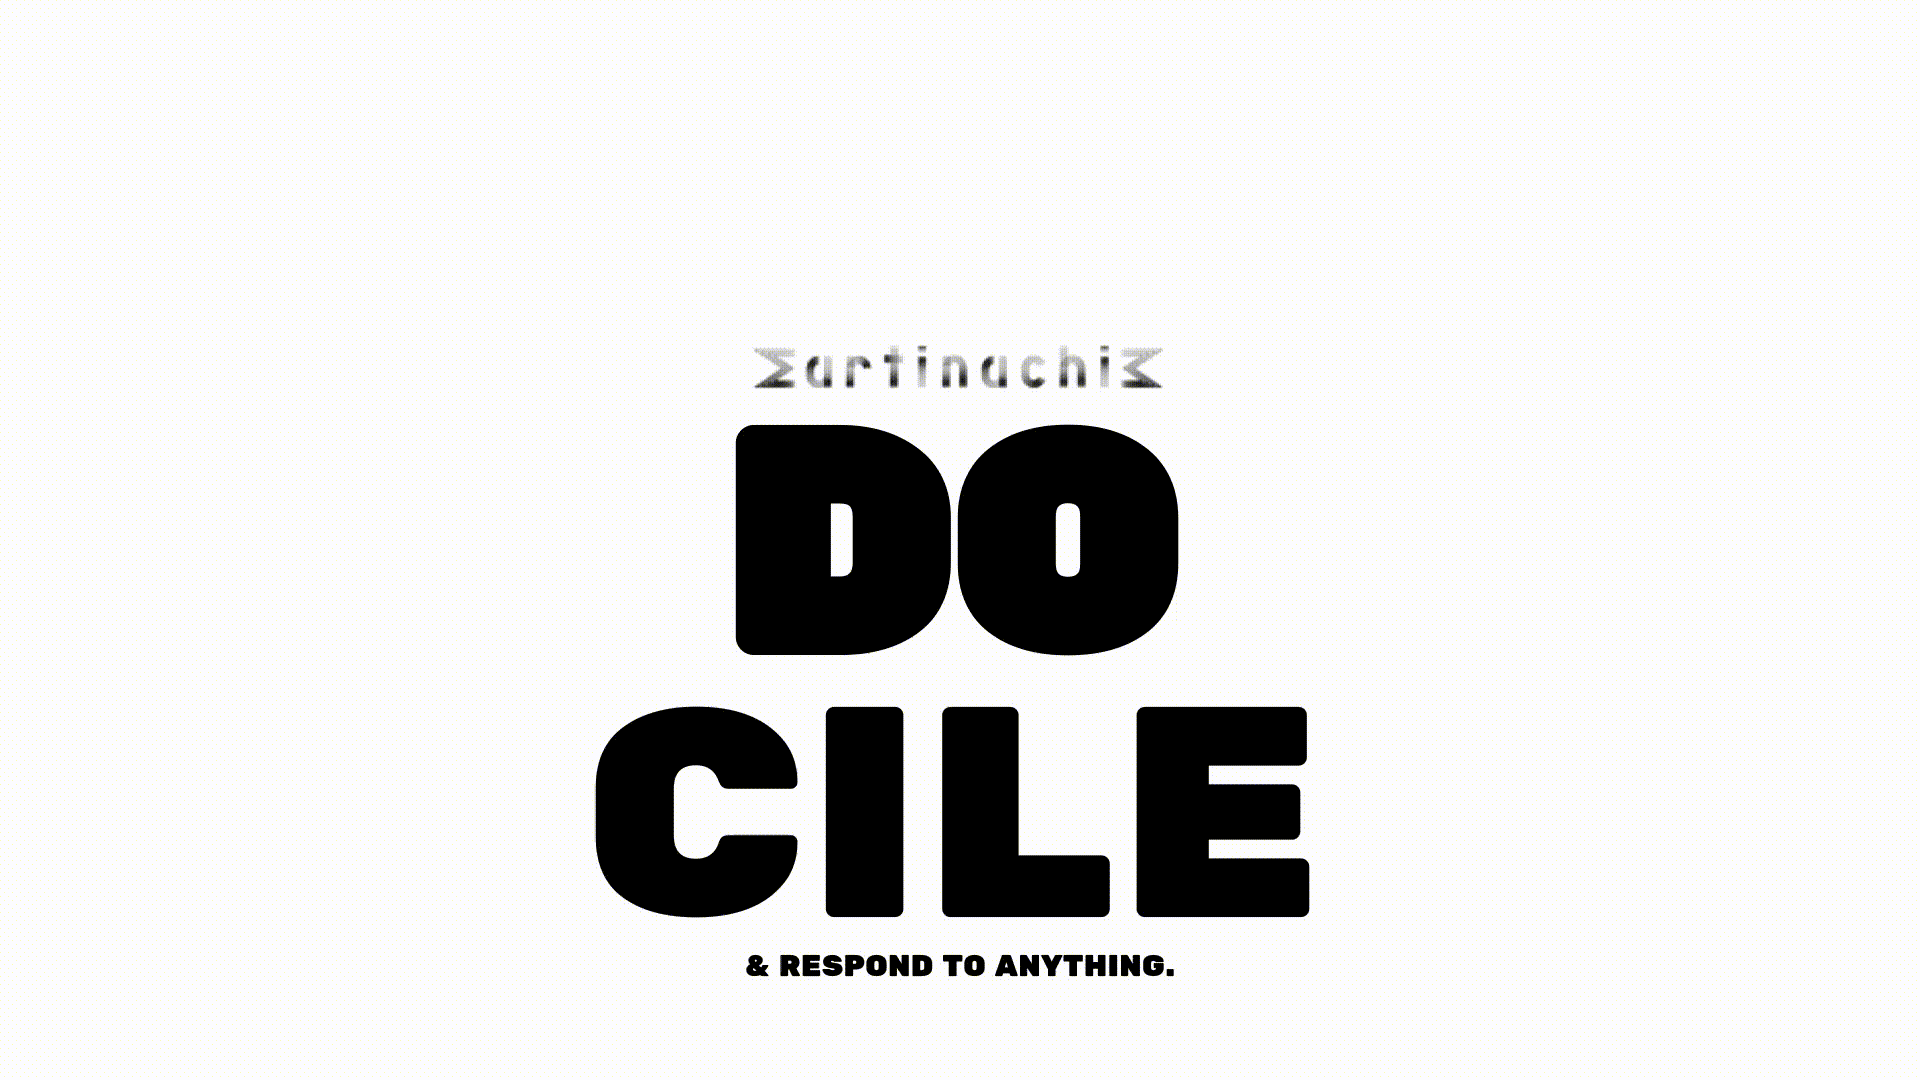 do & respond to anything.